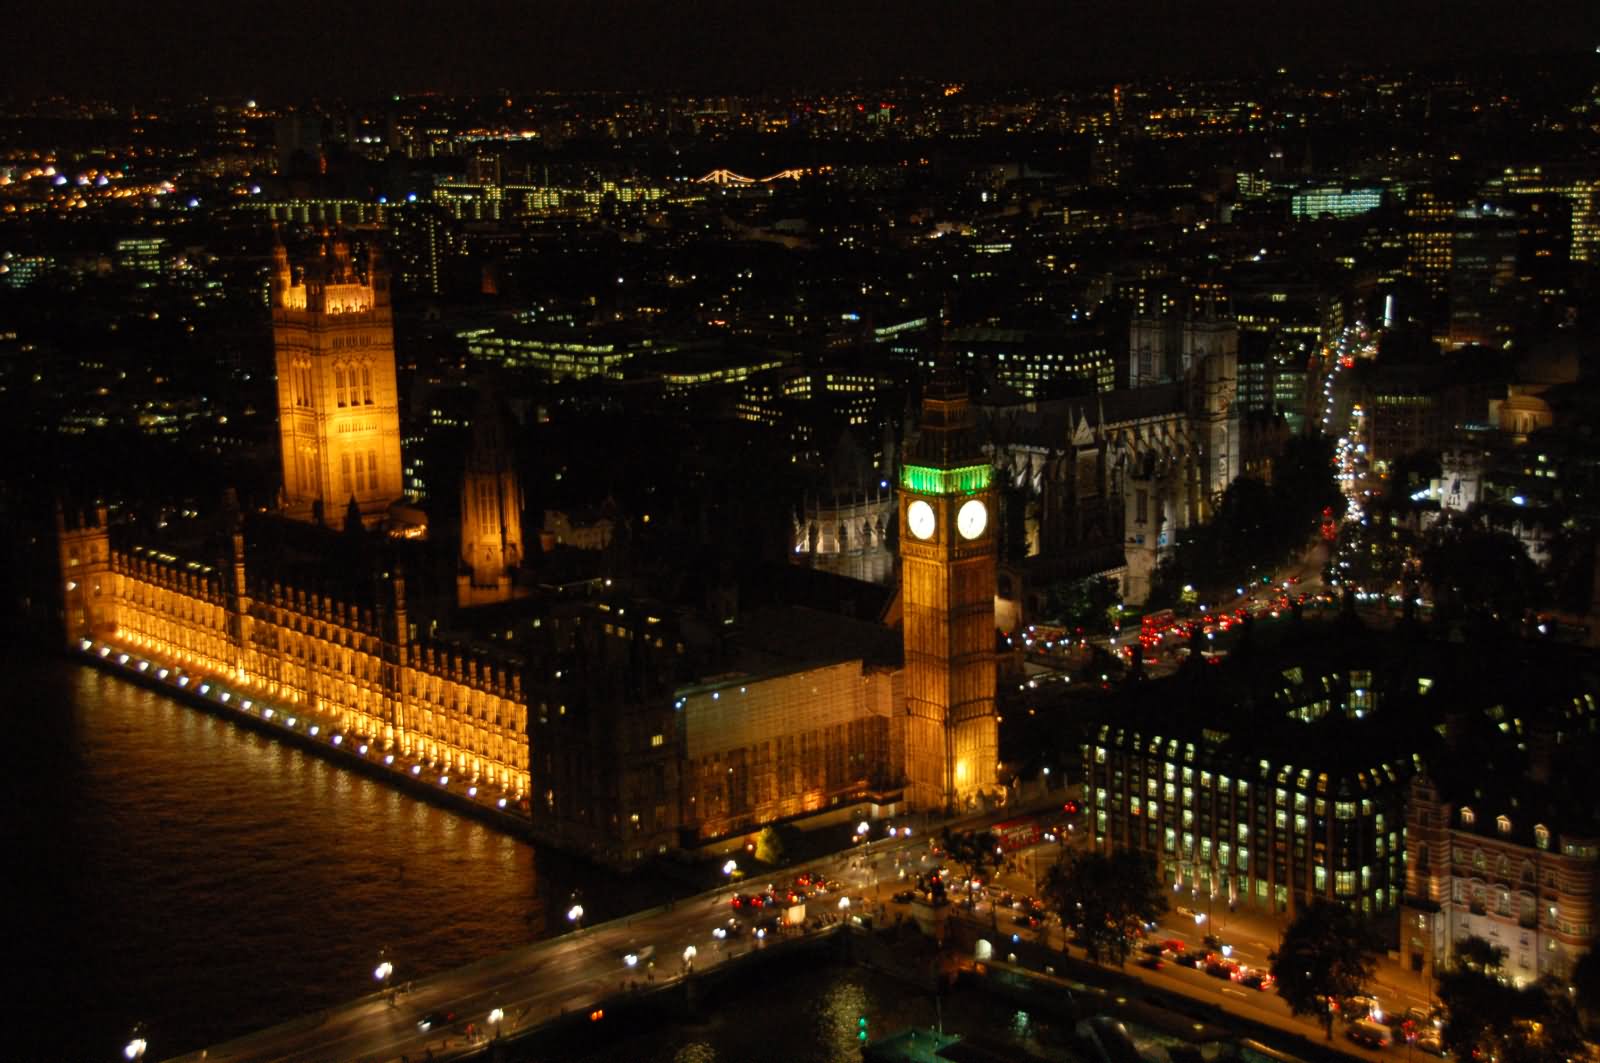 Palace Of Westminster And Big Ben At Night View From London Eye